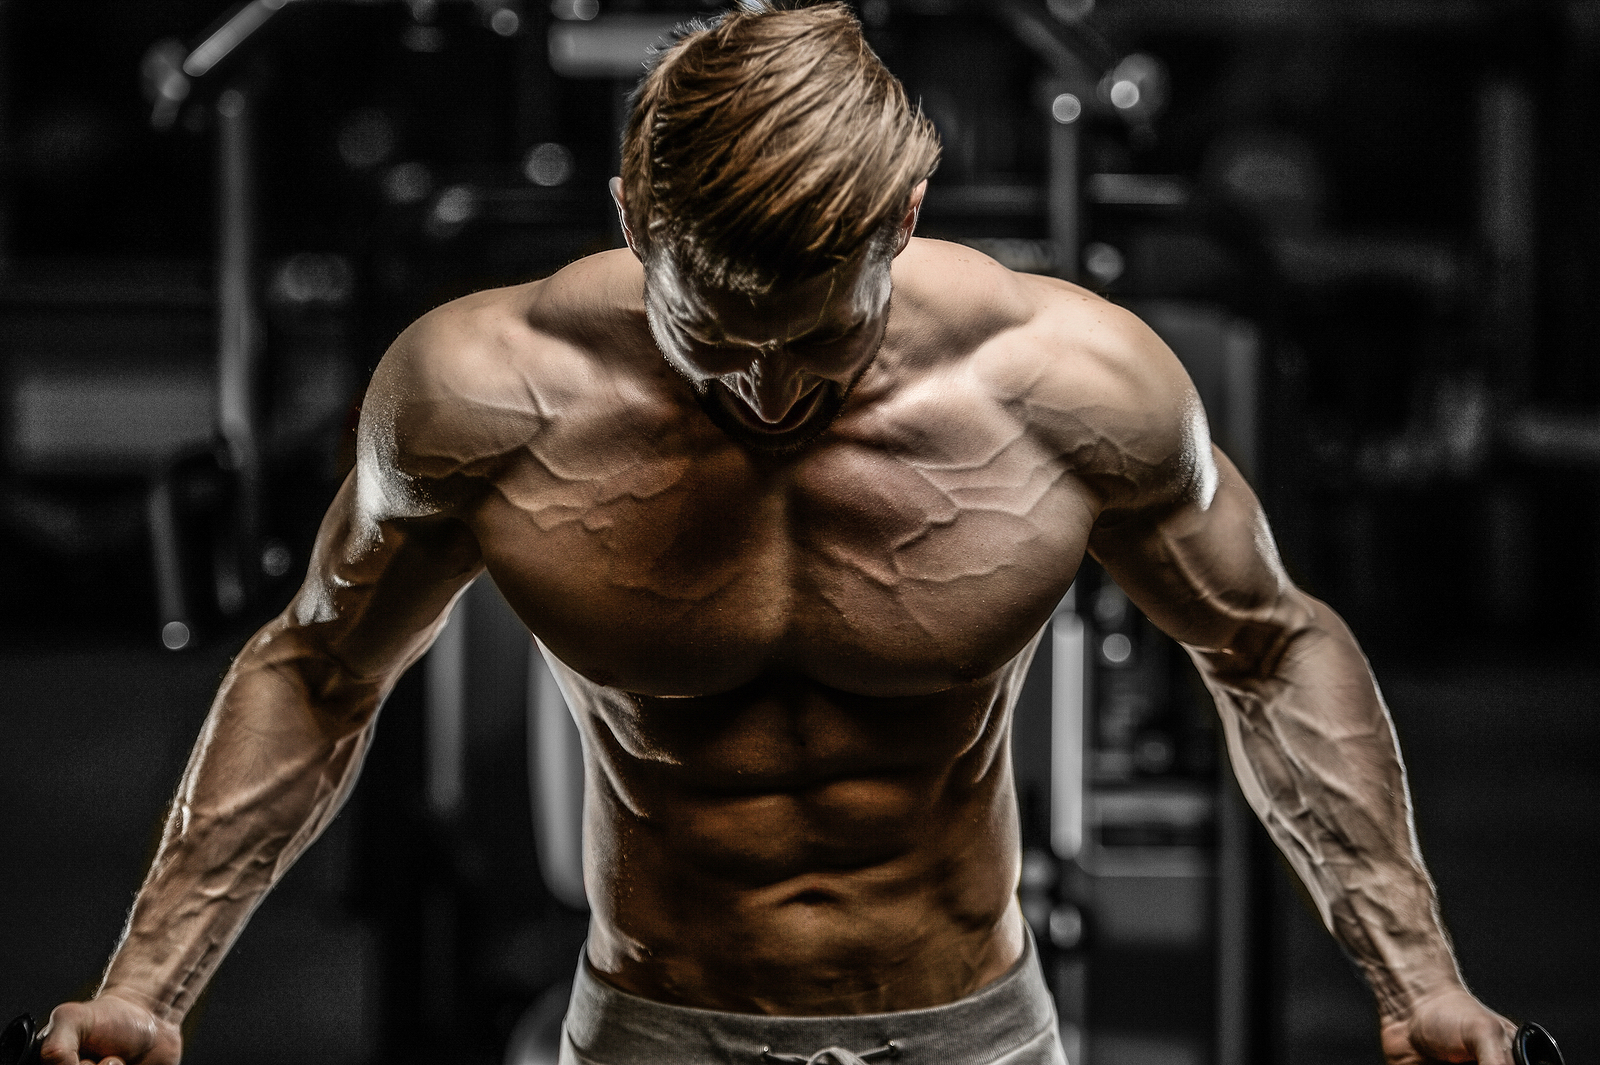 How To Bulk Up Fast WITHOUT Getting Fat (4 Bulking Mistakes